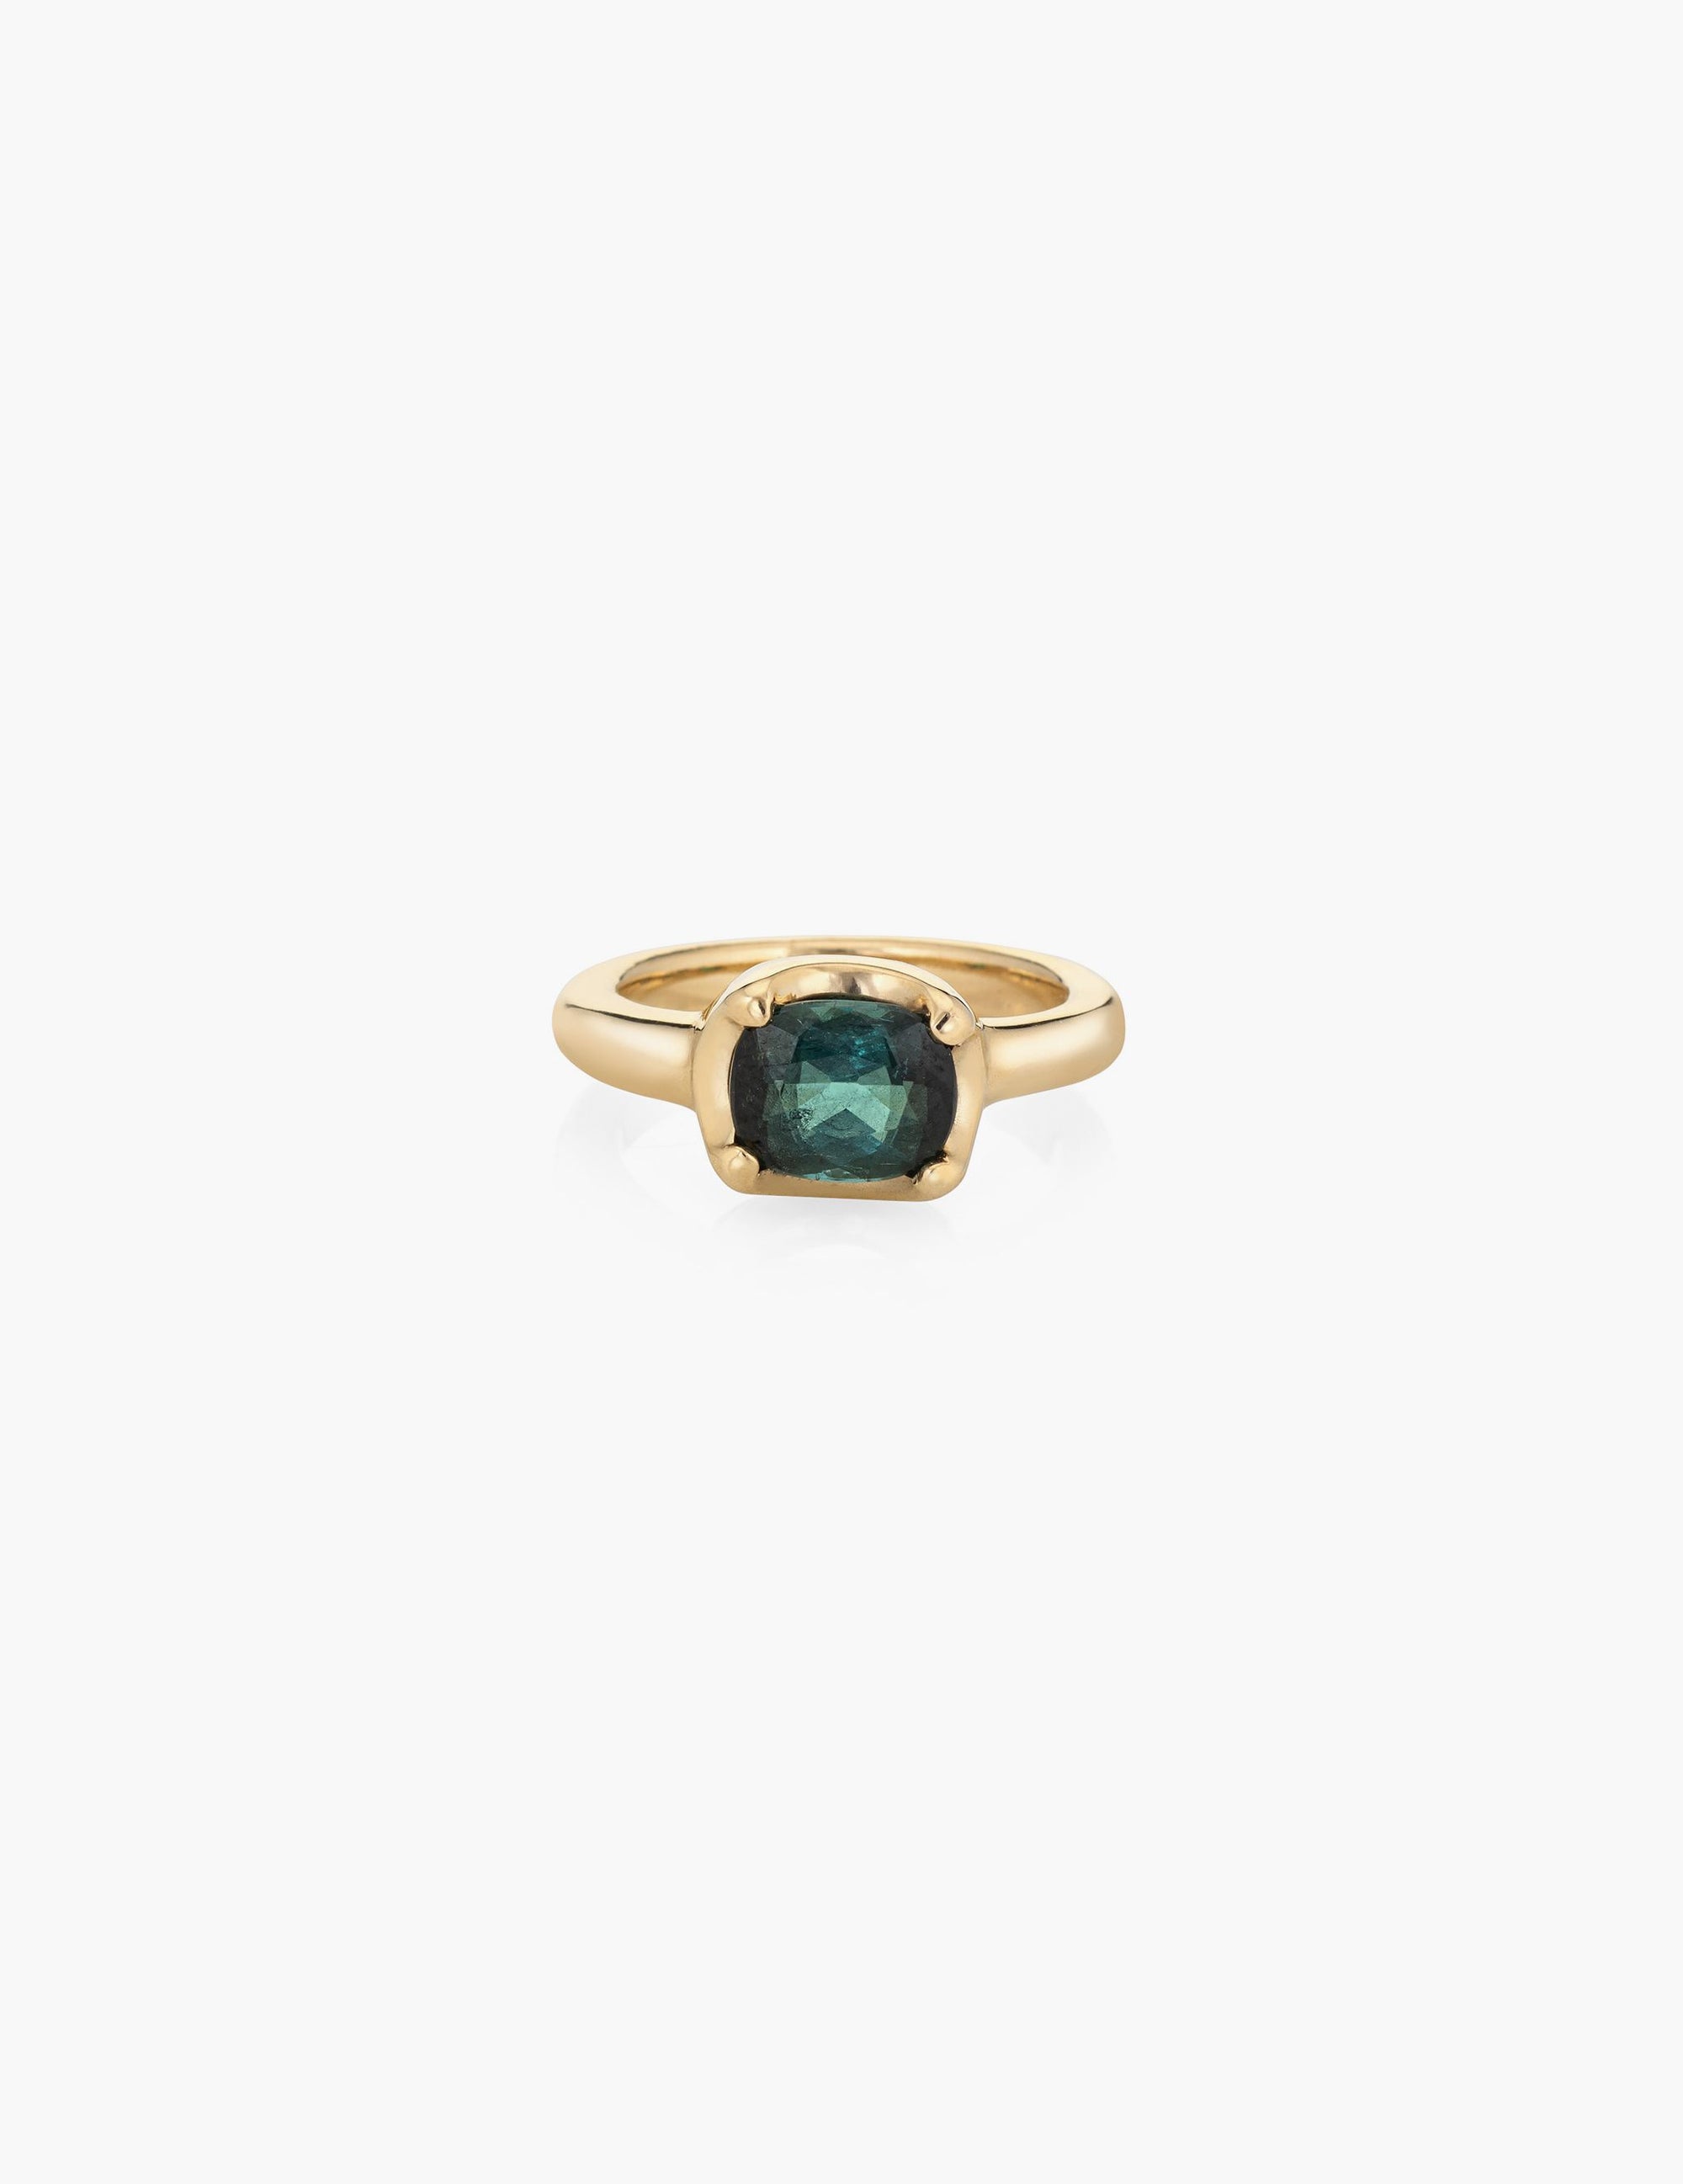 Green Tourmaline Ring with Prongs